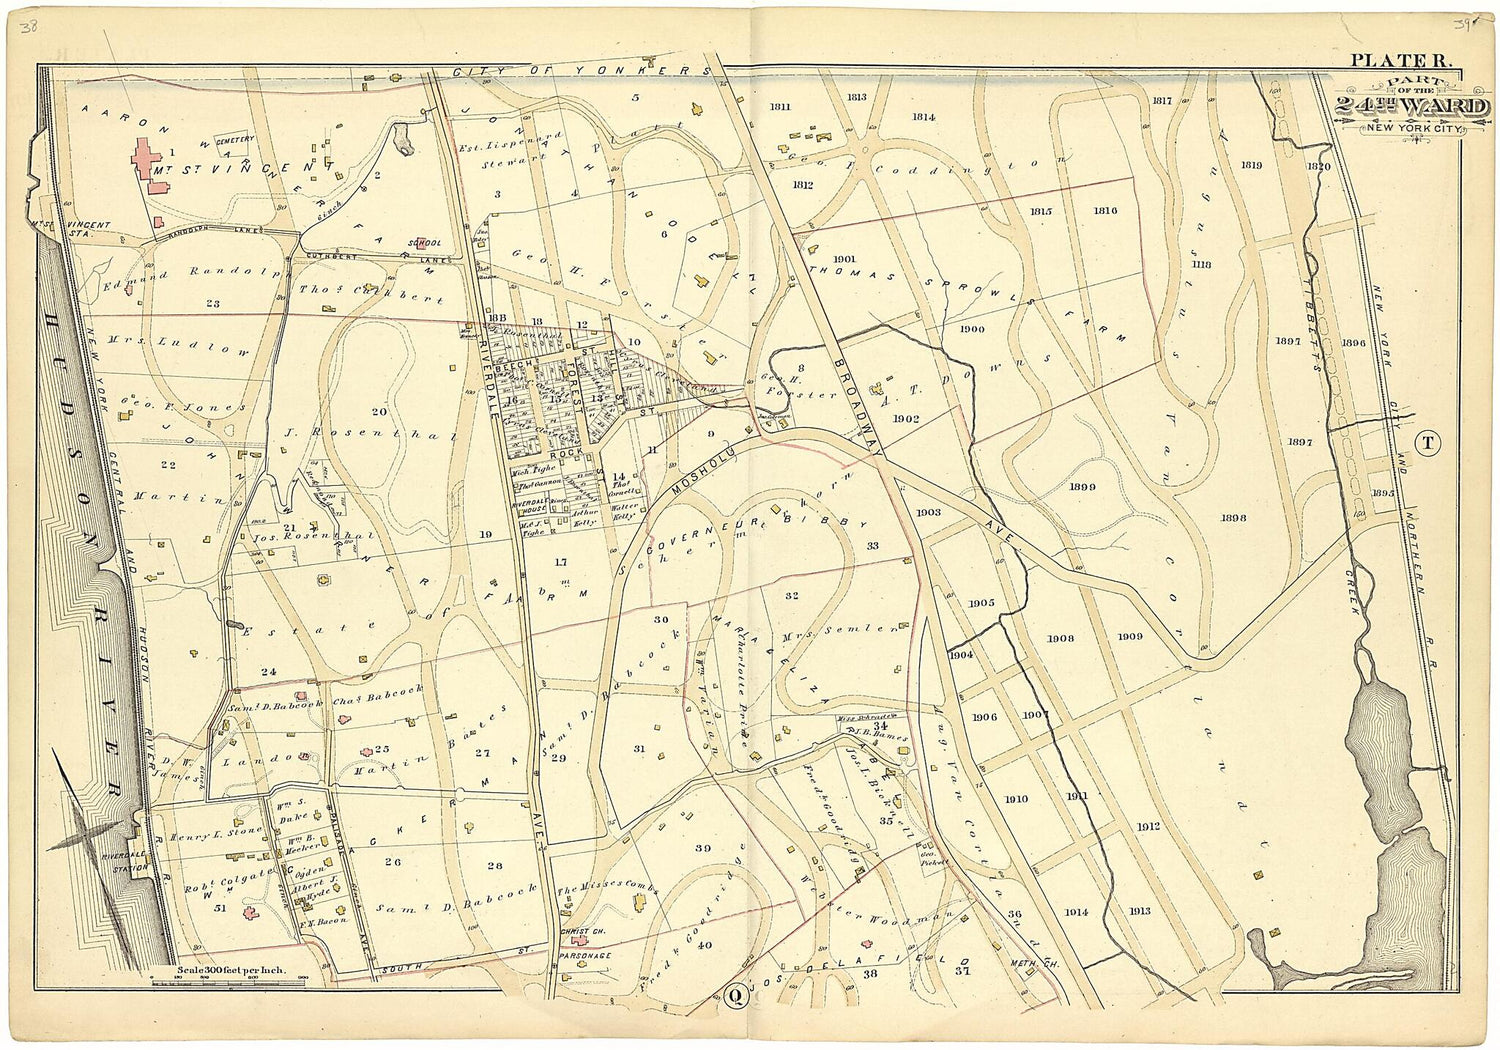 This old map of Part of the 24th Ward New York City - Plate R from Atlas of the Twenty Fourth Ward, New York City from 1882 was created by A. H. (August H.) Mueller in 1882